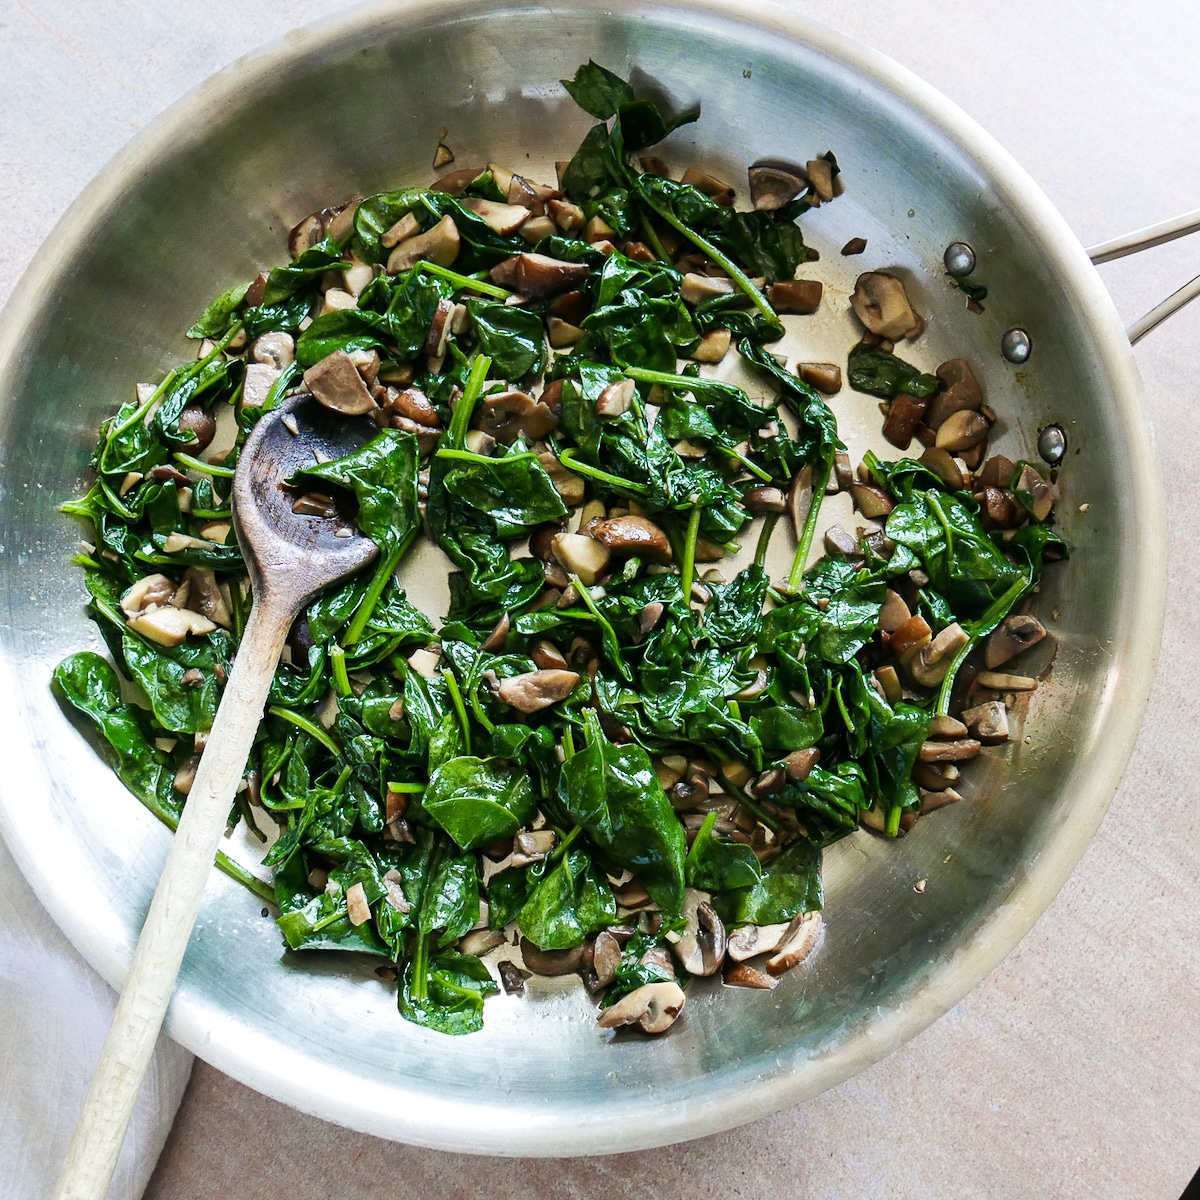 Mushrooms, garlic, and spinach cooking in a large skillet with wooden spoon.